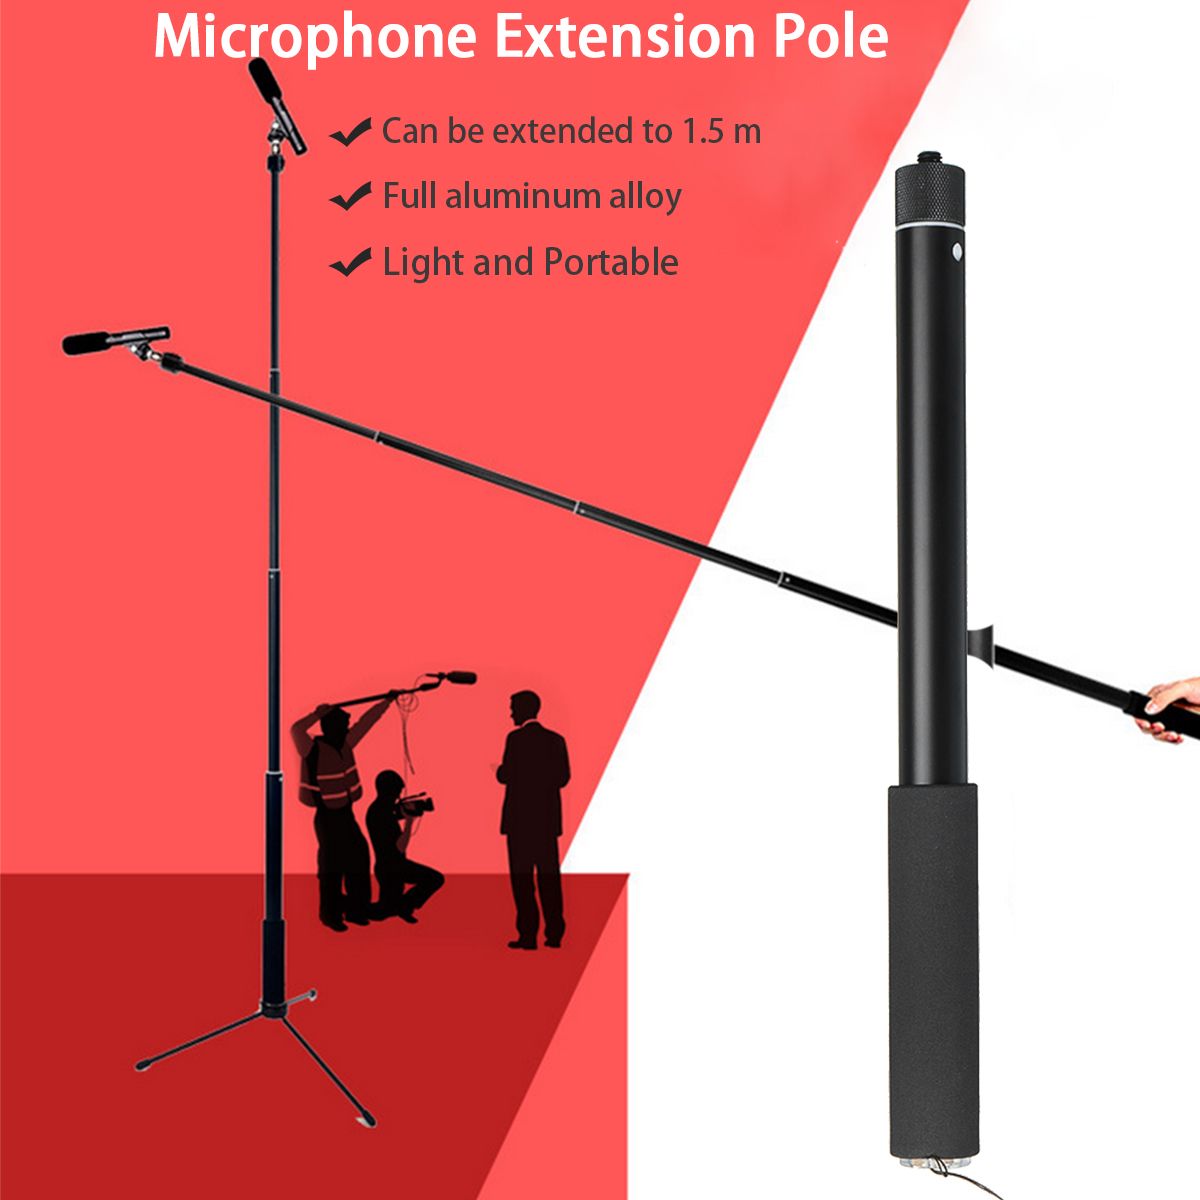 355cm-150cm-5-Section-Scalable-Microphone-Extension-Pole-Holder-38-Inches-Connector-1400712